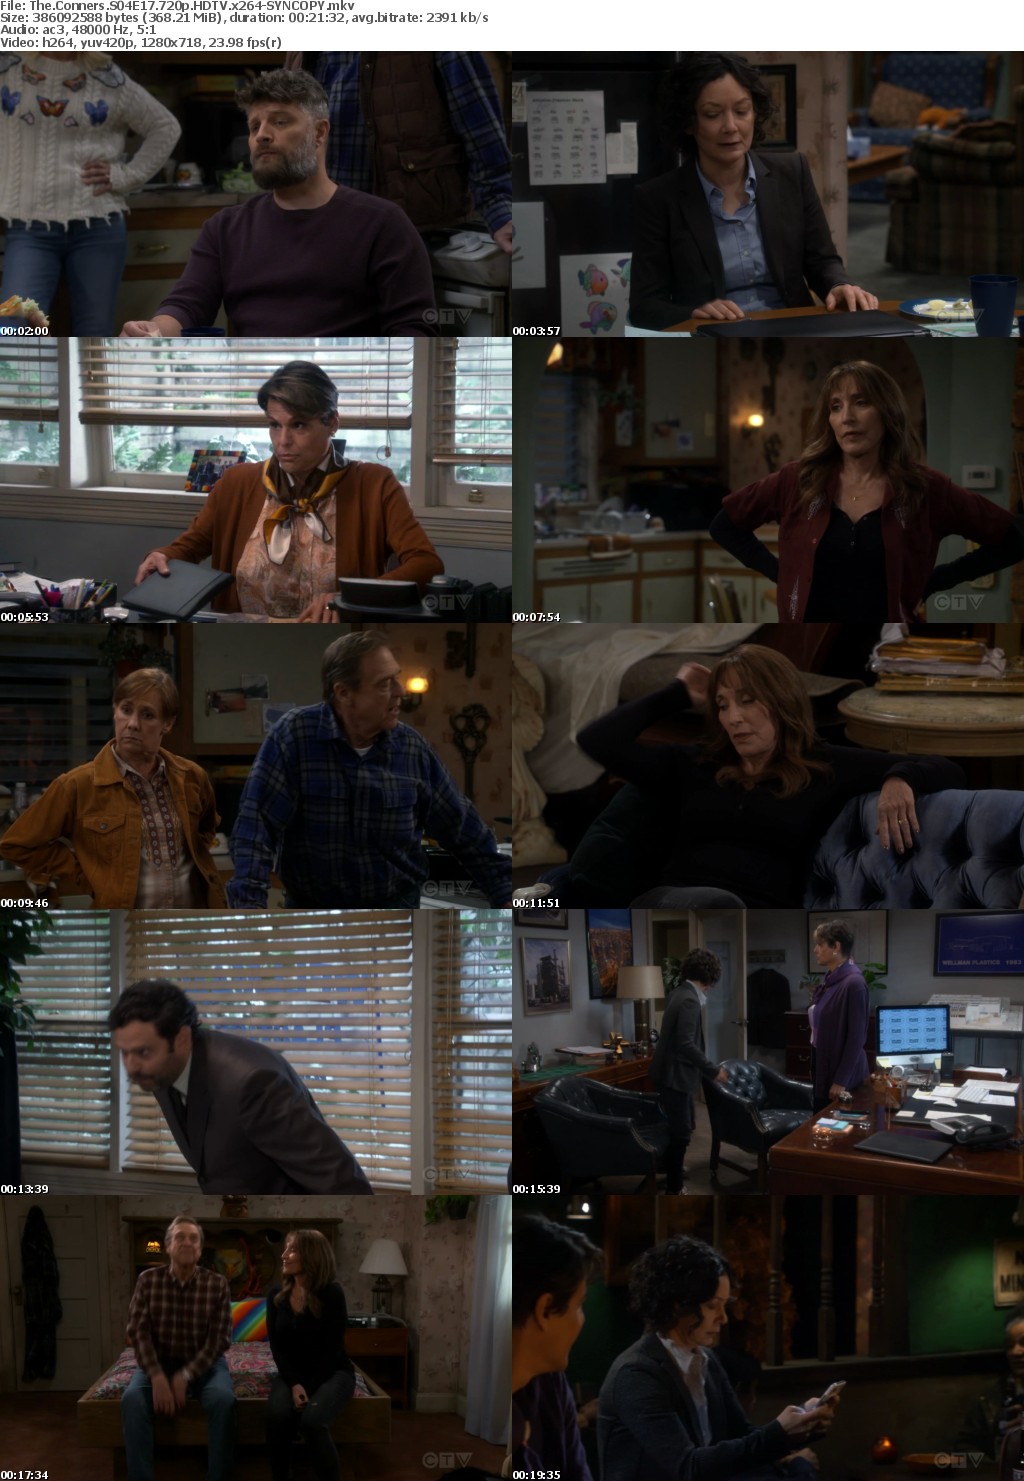 The Conners S04E17 720p HDTV x264-SYNCOPY